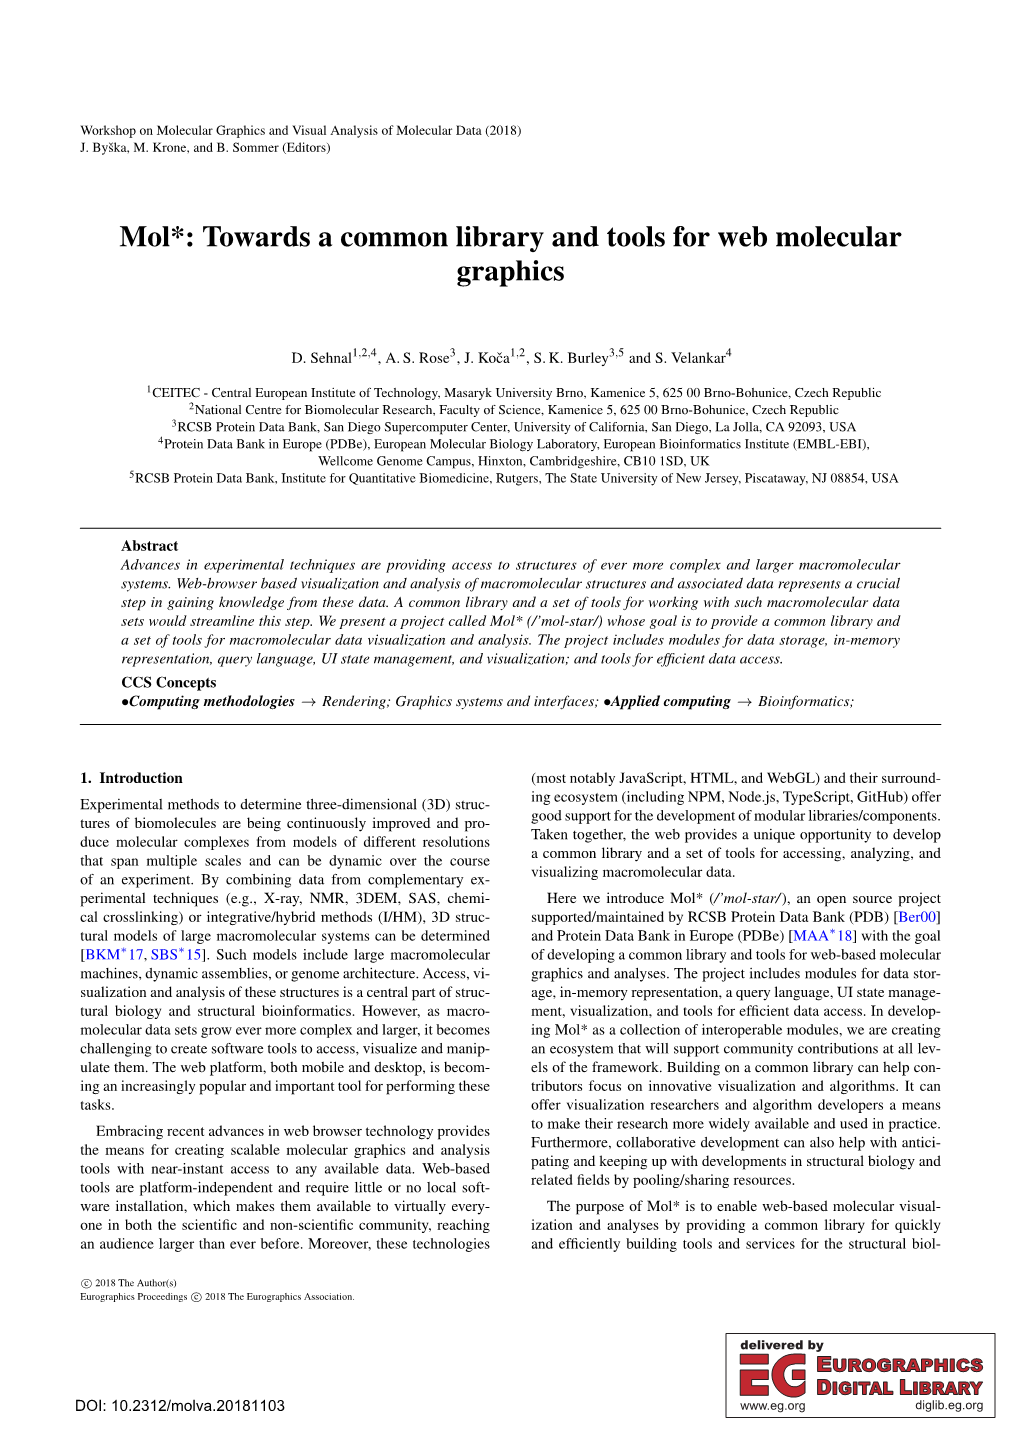 Mol*: Towards a Common Library and Tools for Web Molecular Graphics